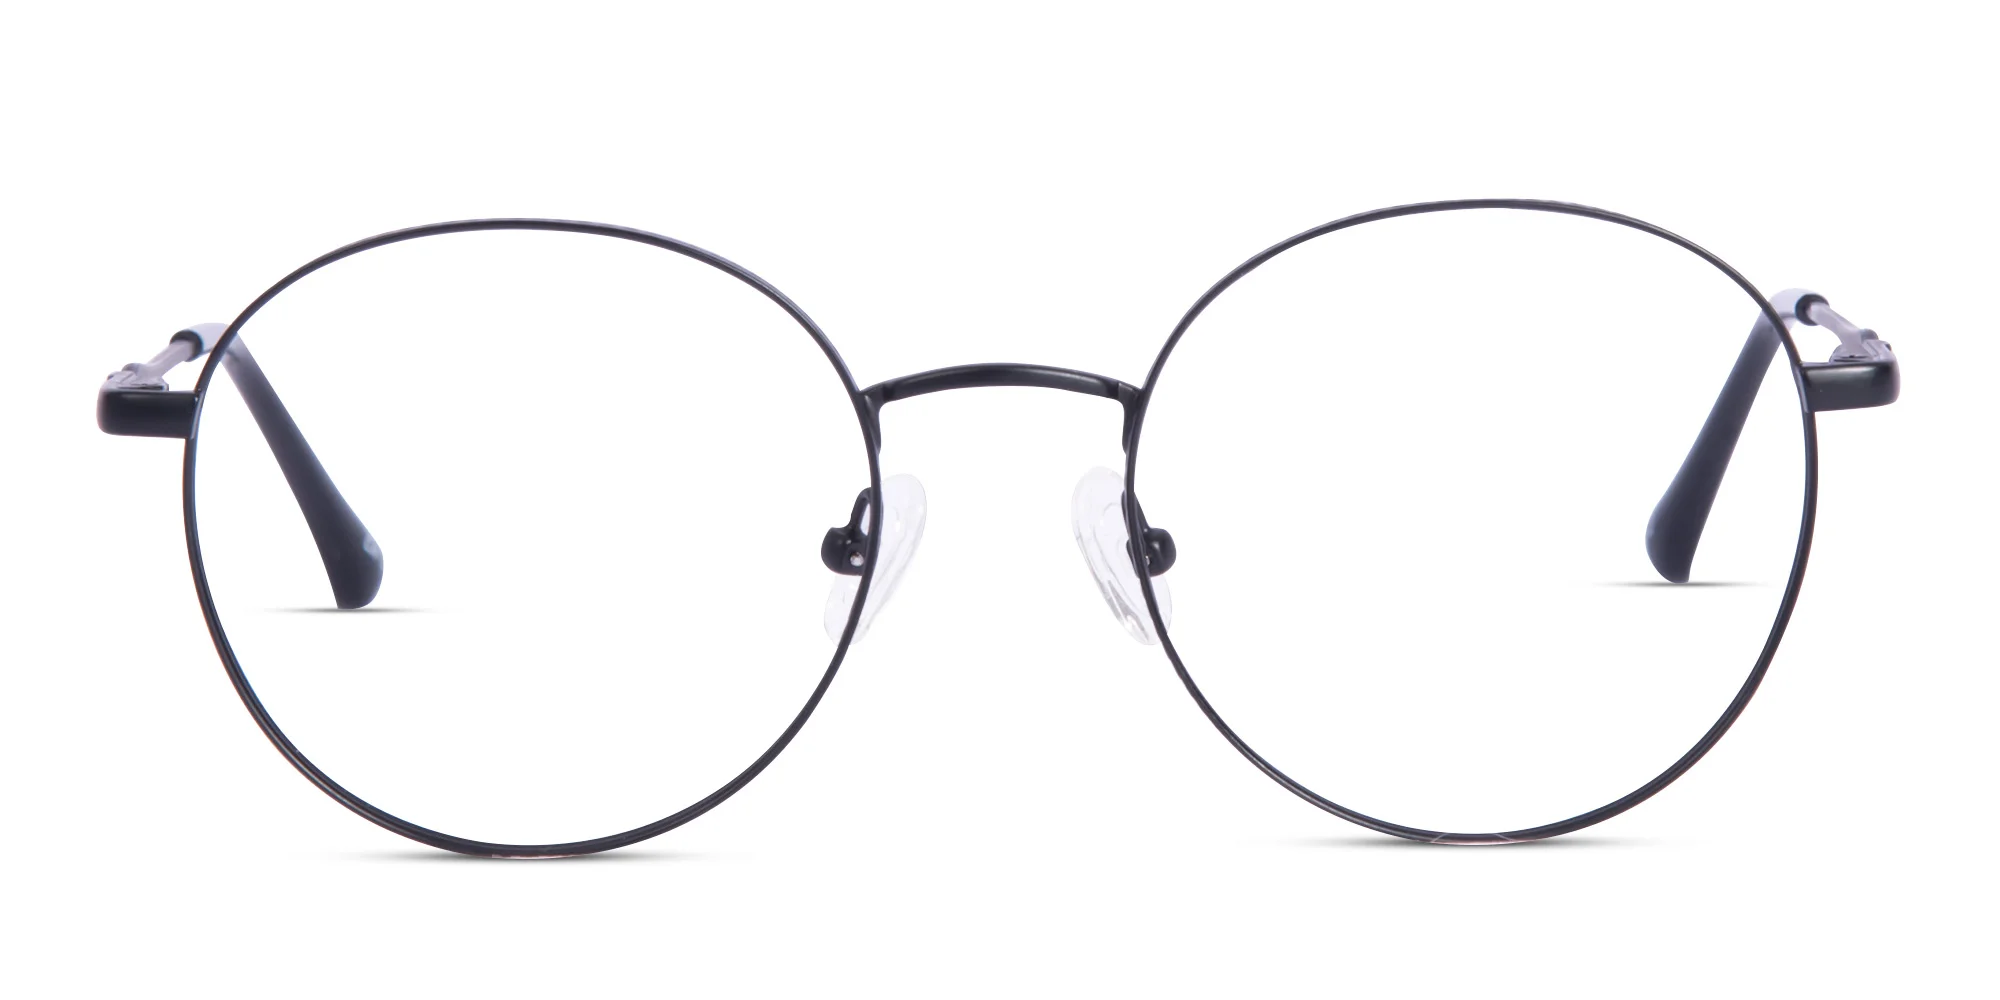 Wire Rimmed Spectacles